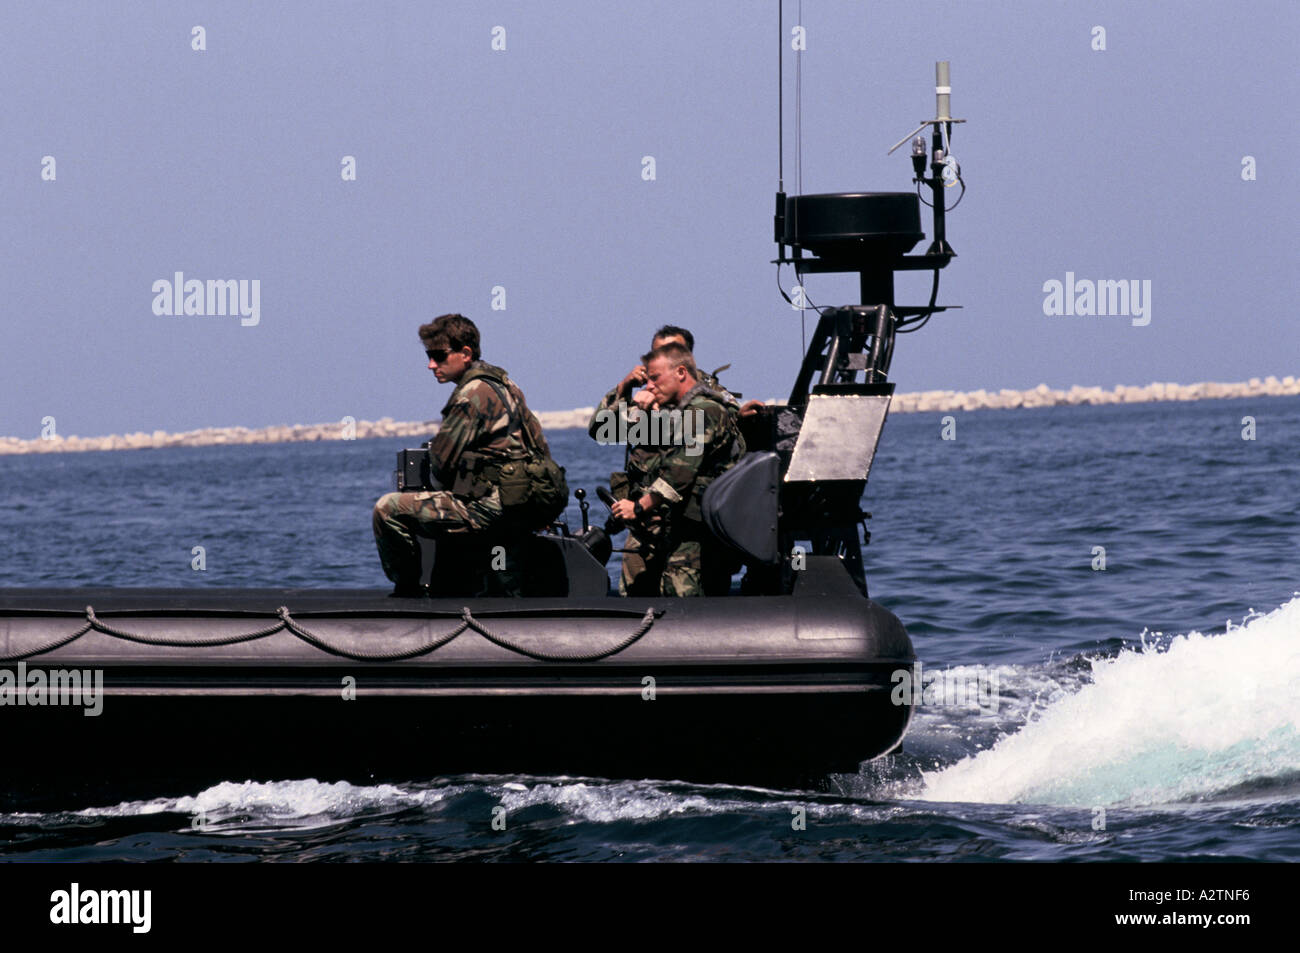 USA Navy Seal su Excersise in Med Foto Stock